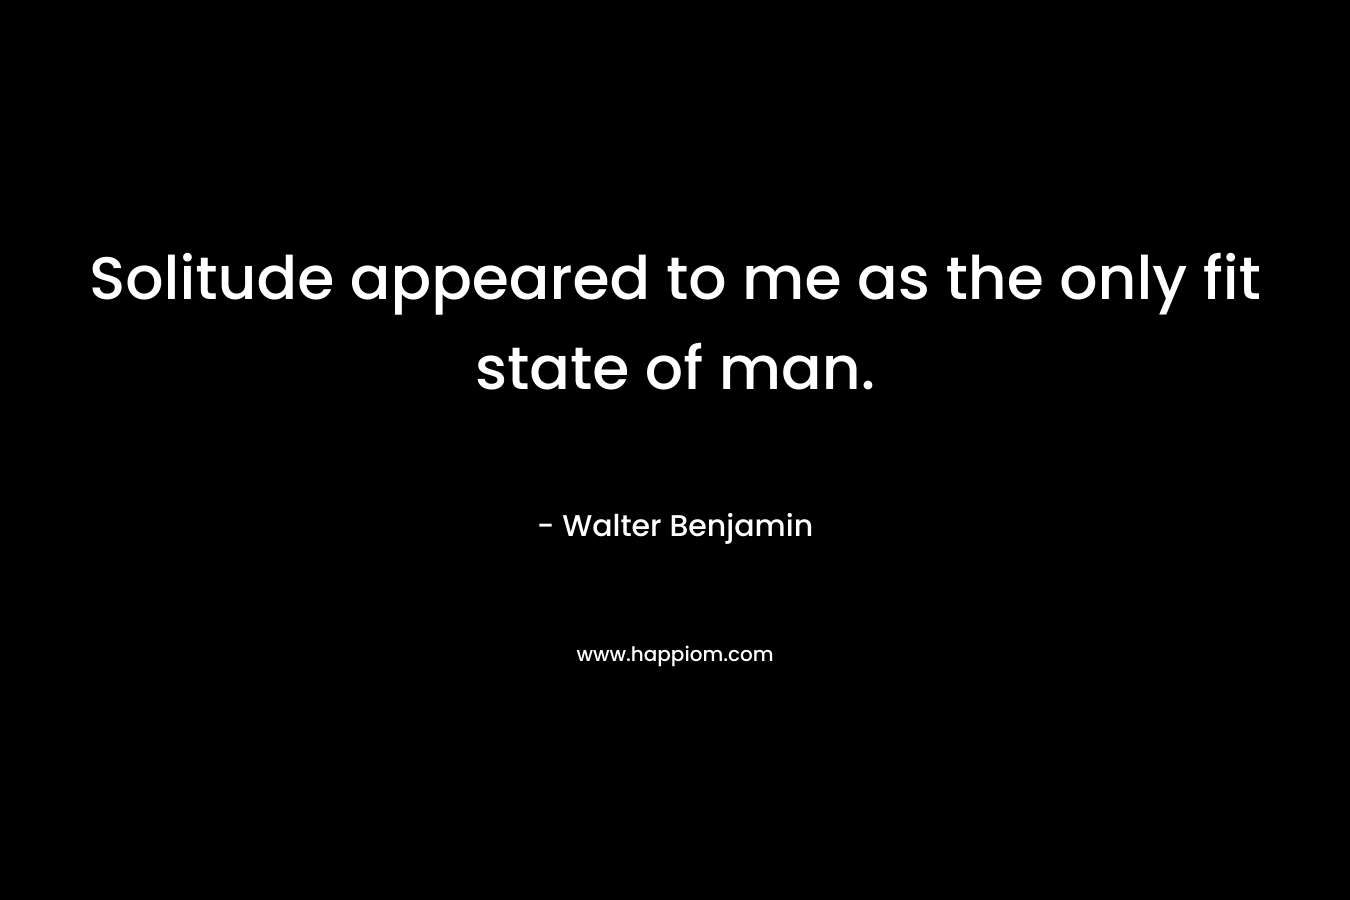 Solitude appeared to me as the only fit state of man. – Walter Benjamin